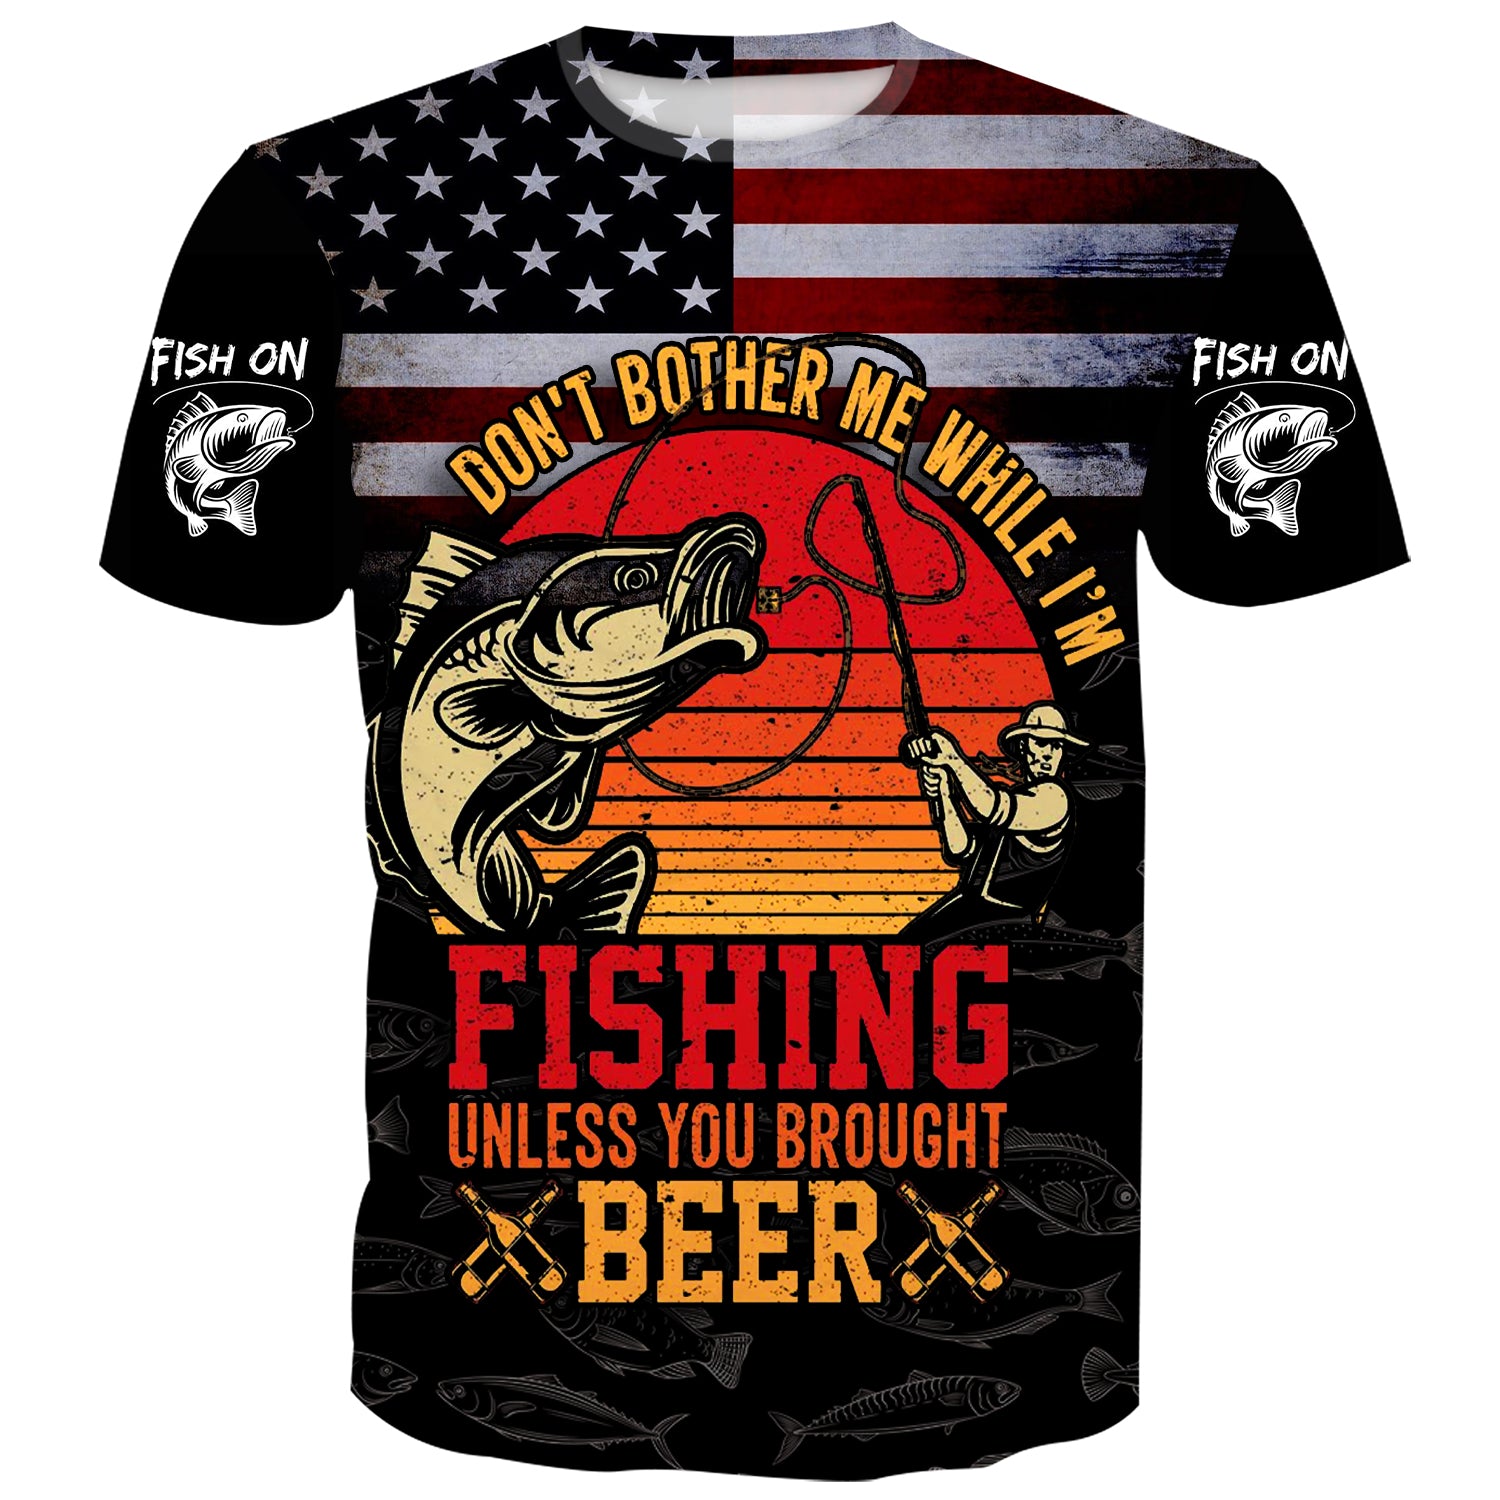 Don't bother me while I'm Fishing - Fish on T-Shirt